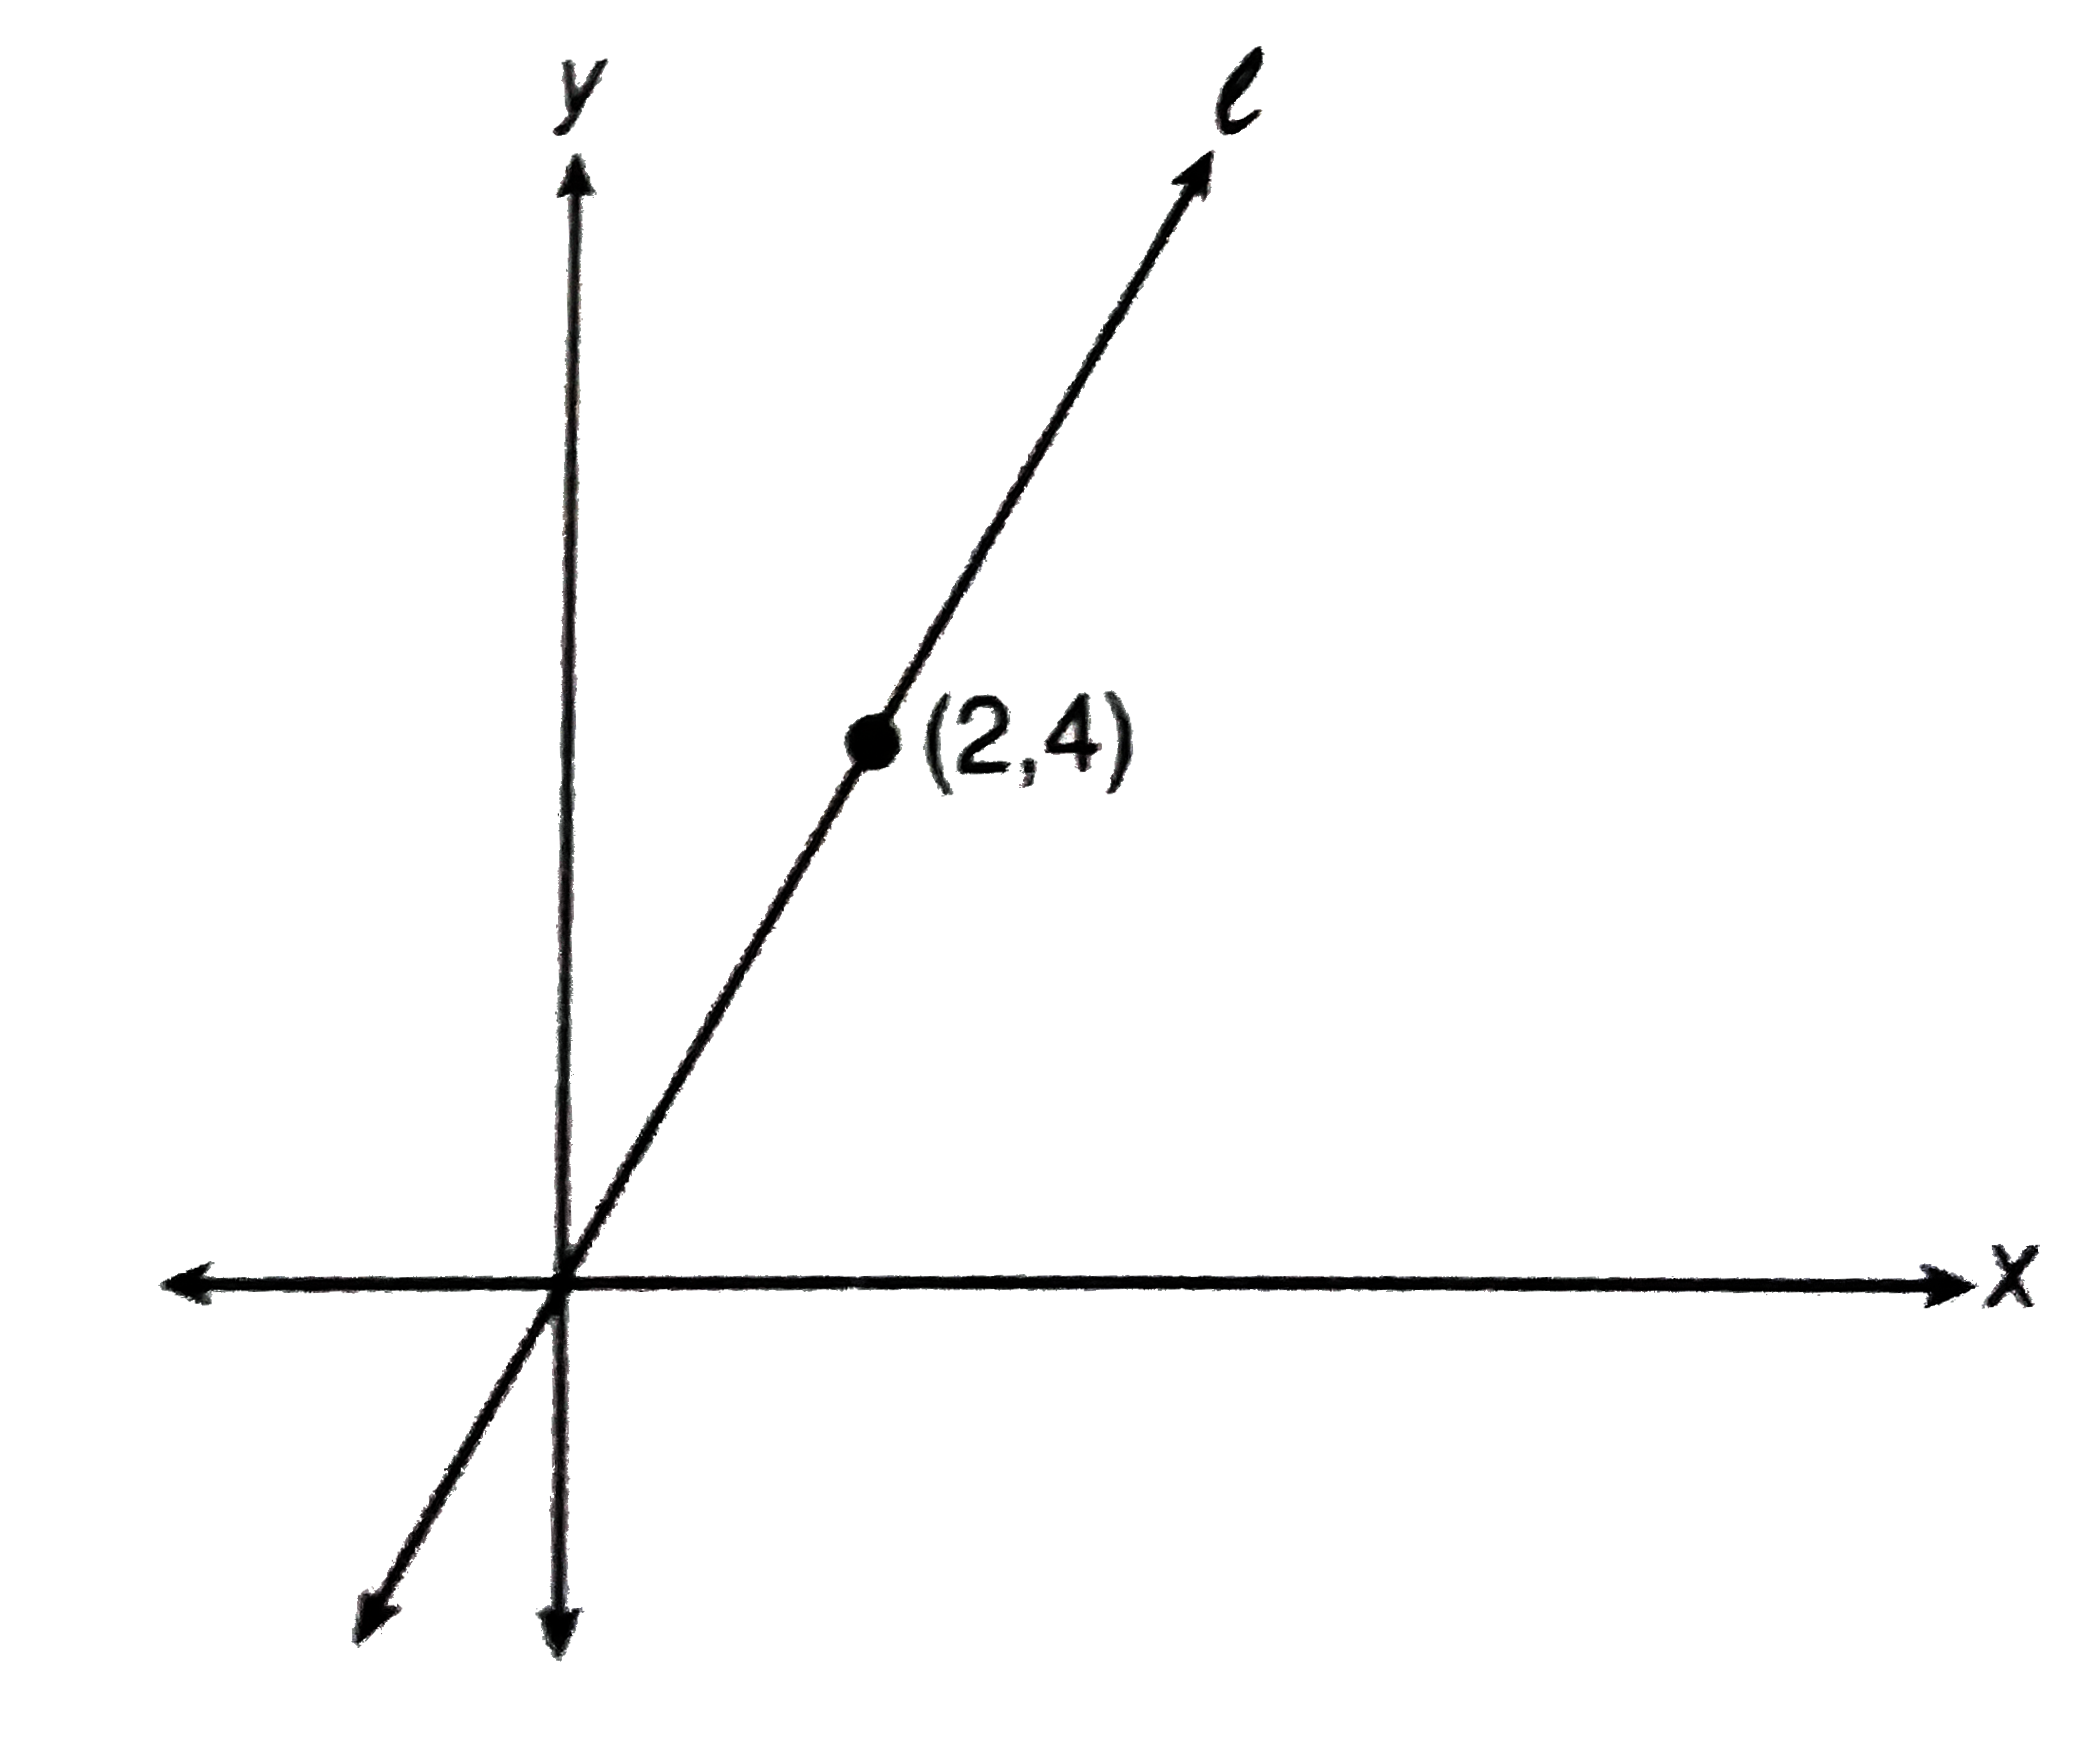 In the accompanying figure. Line l passes through the origin and the point (2, 4). Line m (not shown) is perpendicular to line l at (2, 4). Line m intersects the x-axis at which point?